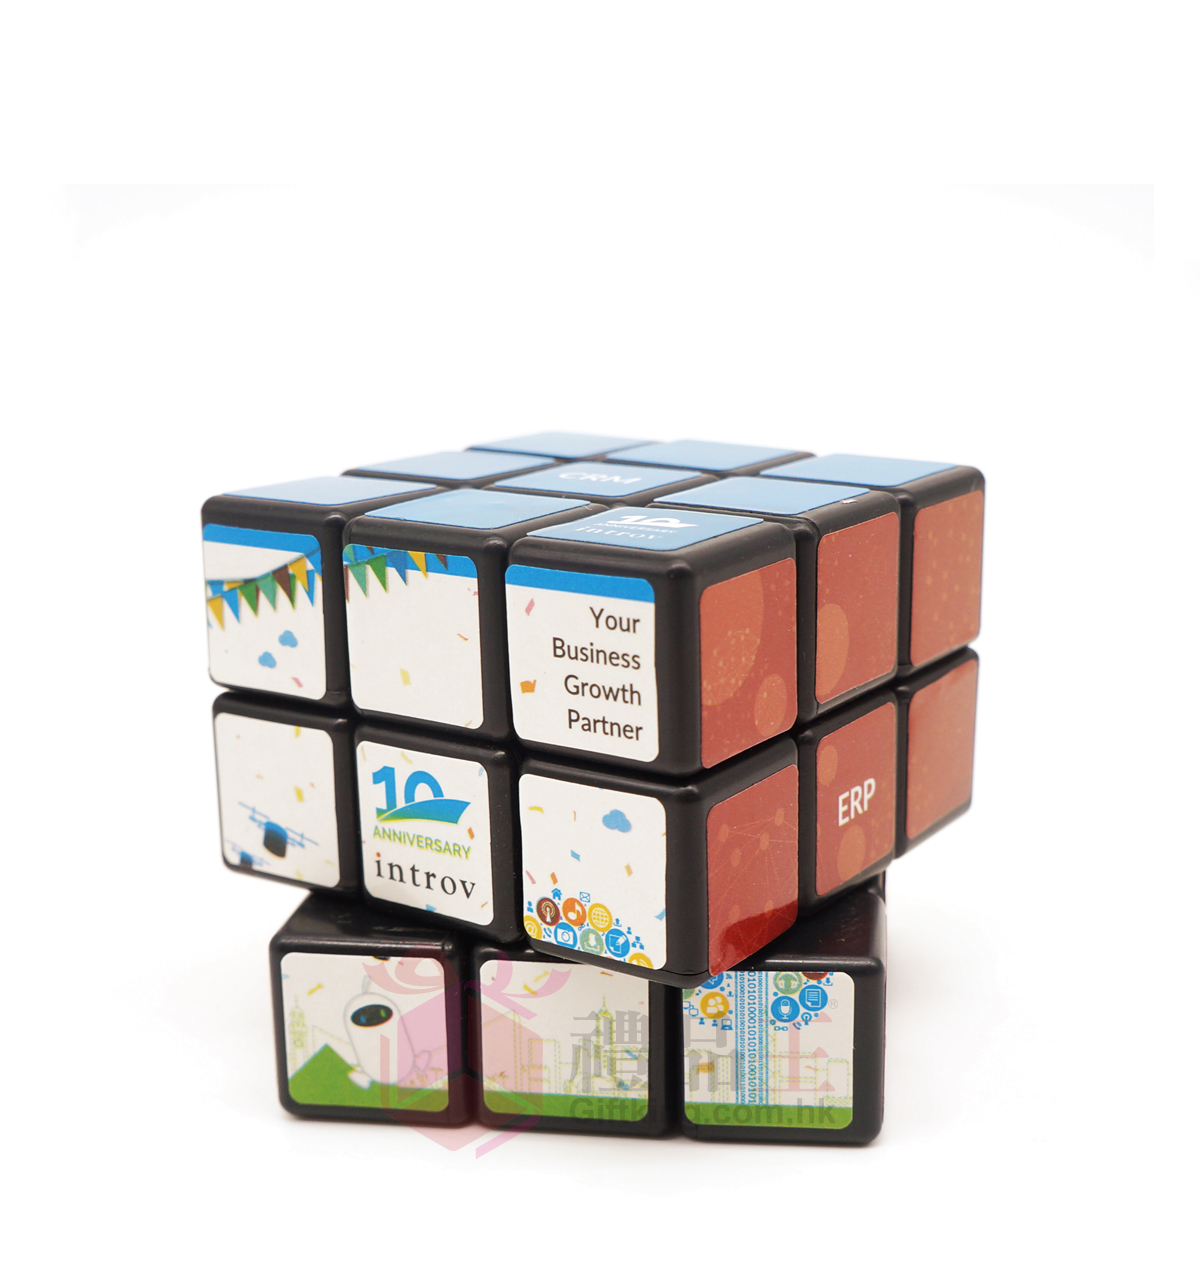 Introv Rubik's Cube (advertising gifts)